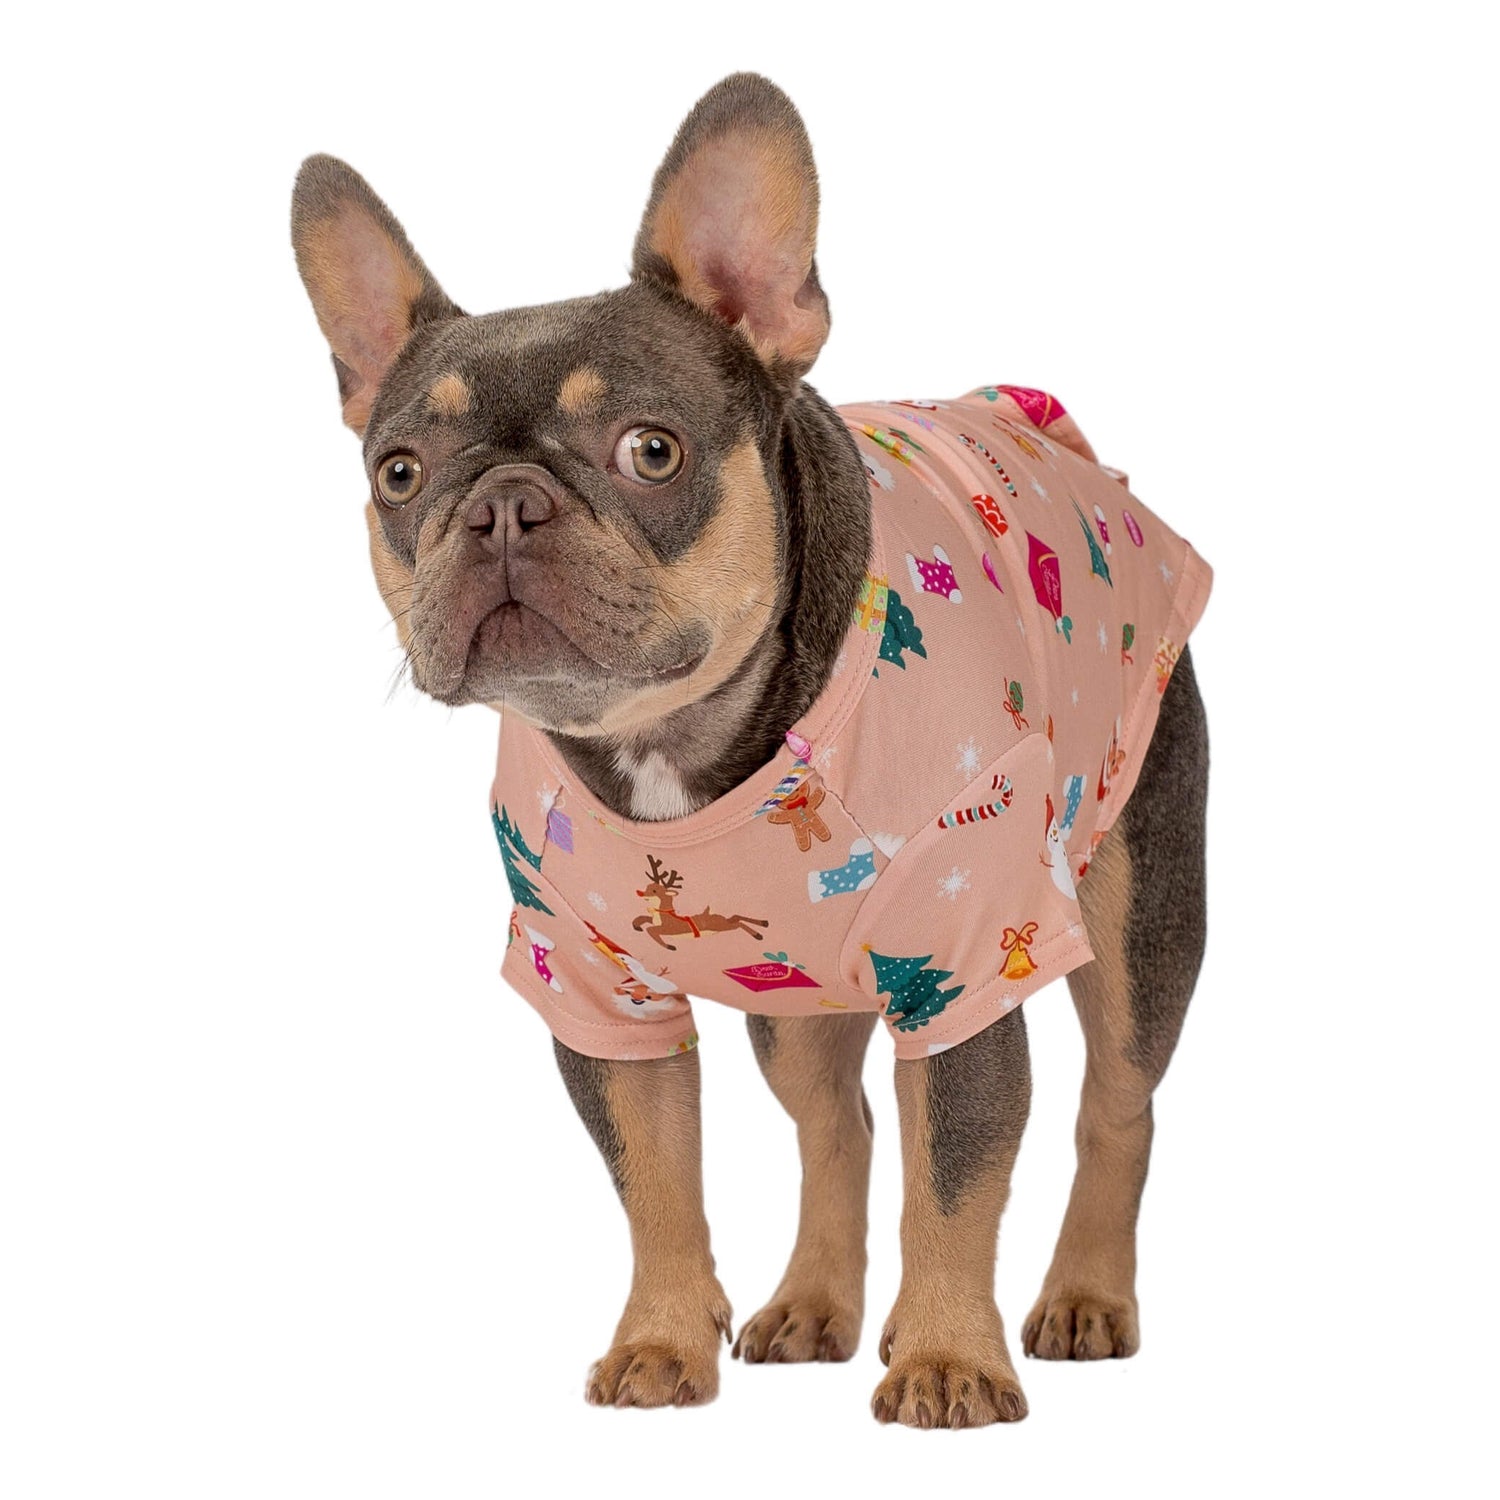 Wednesday, A lilac and tan French Bulldog wearing VIbrant Hounds Dear Santa dog shirt. The dog shirt is peach with Christmas Trees, reindeerm and Christmas presents printed on it.